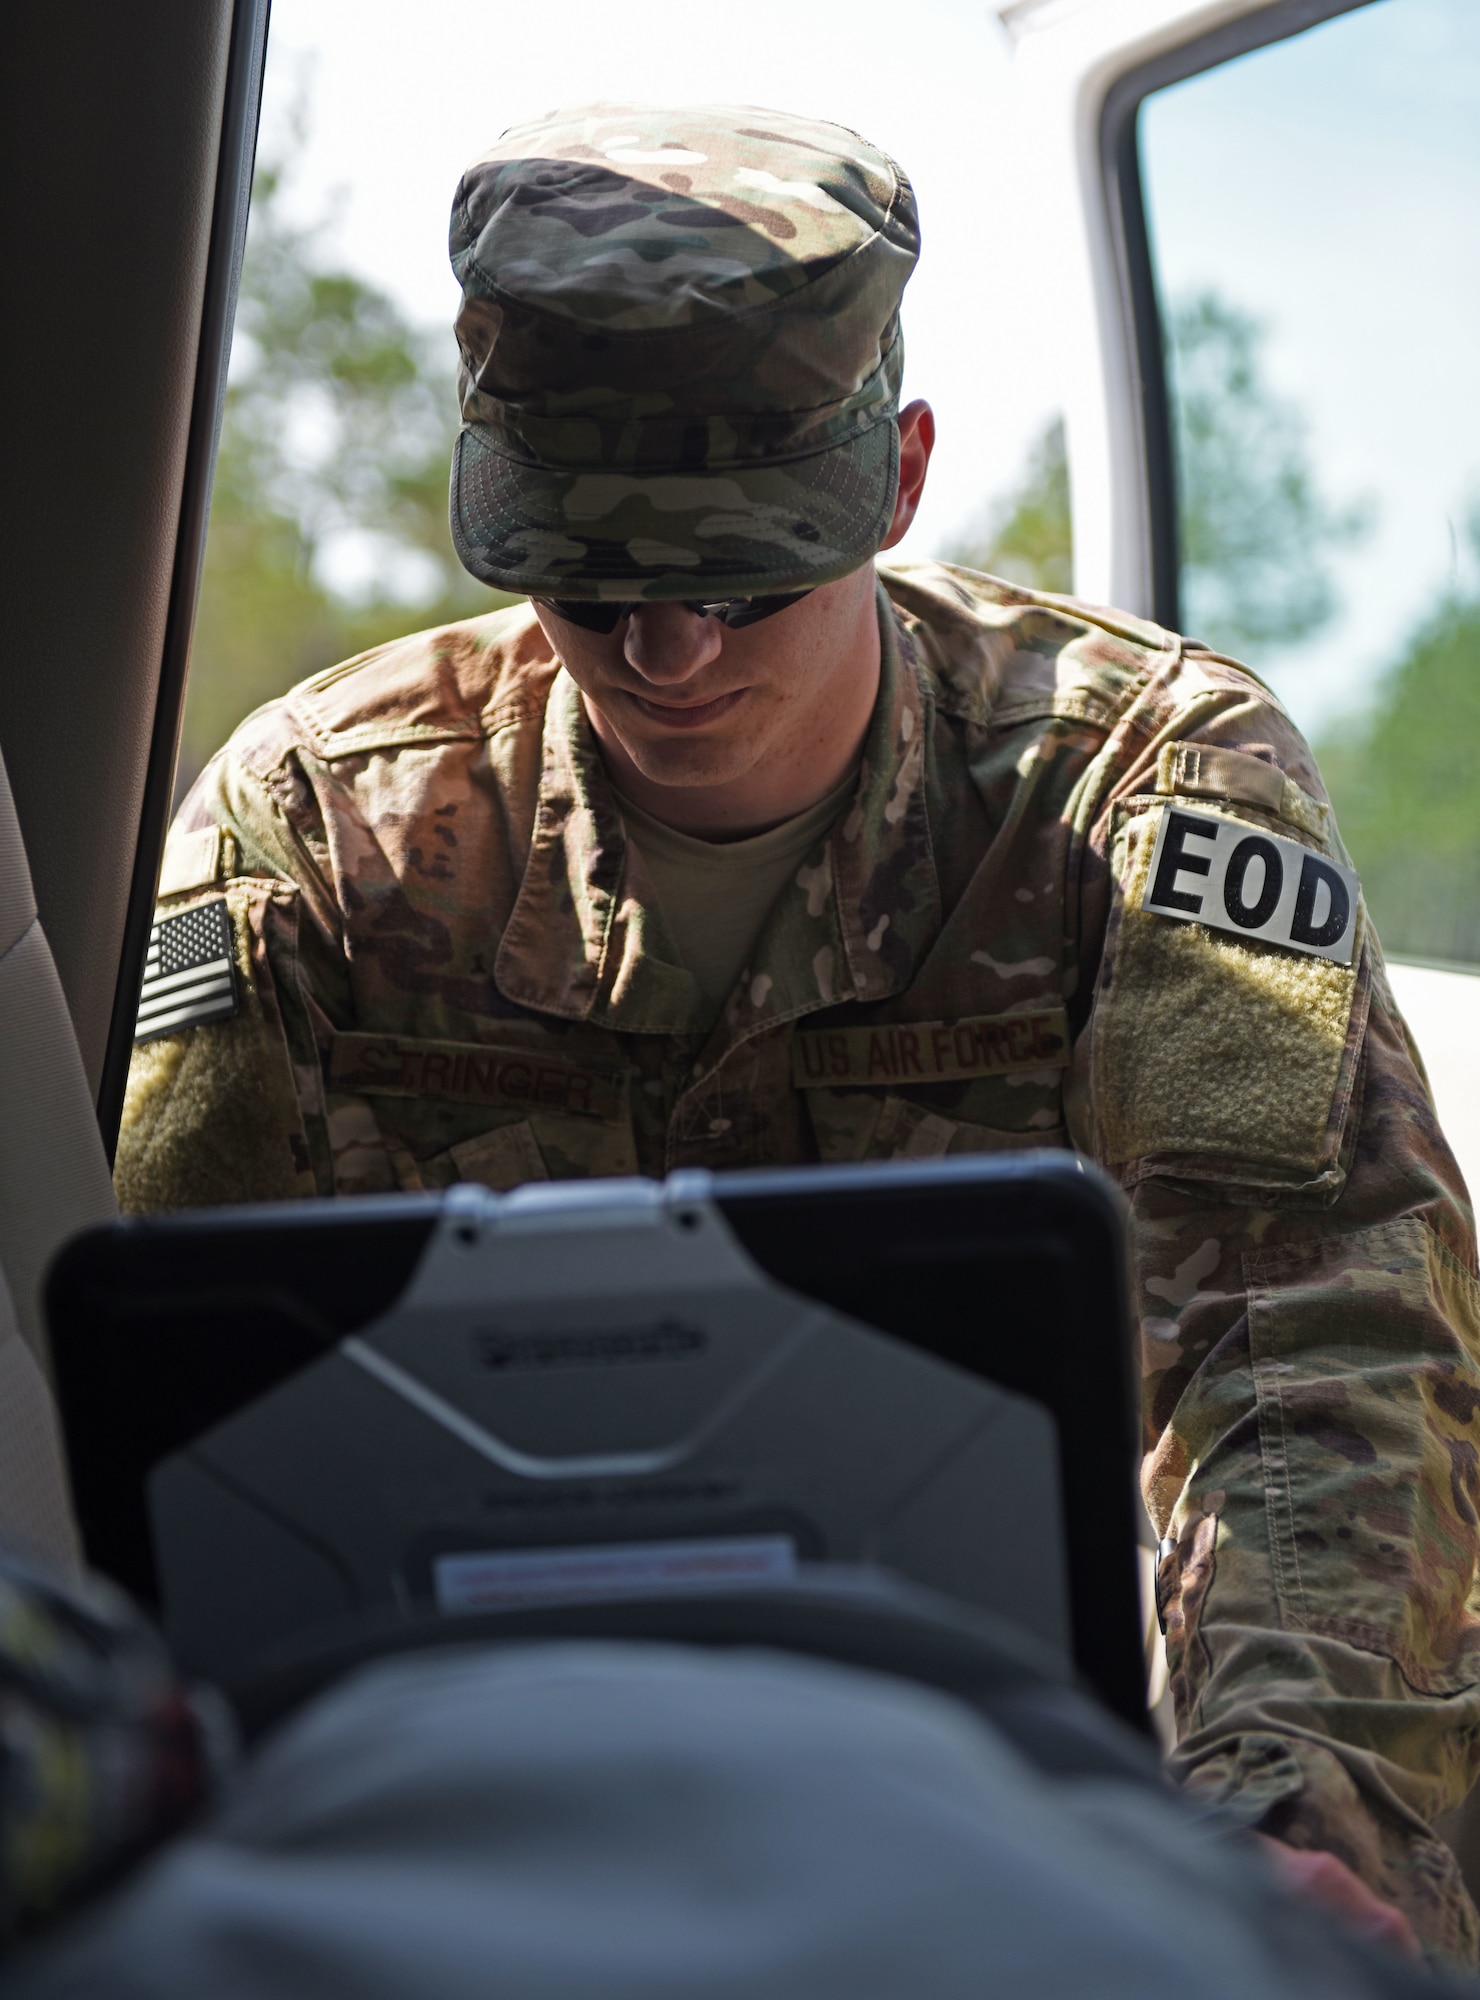 U.S. Air Force Airman 1st Class Zackary Stringer, 20th Civil Engineer Squadron explosive ordinance disposal (EOD) apprentice, identifies ordnance using a specialized database in Conway, S.C., April 4, 2018.